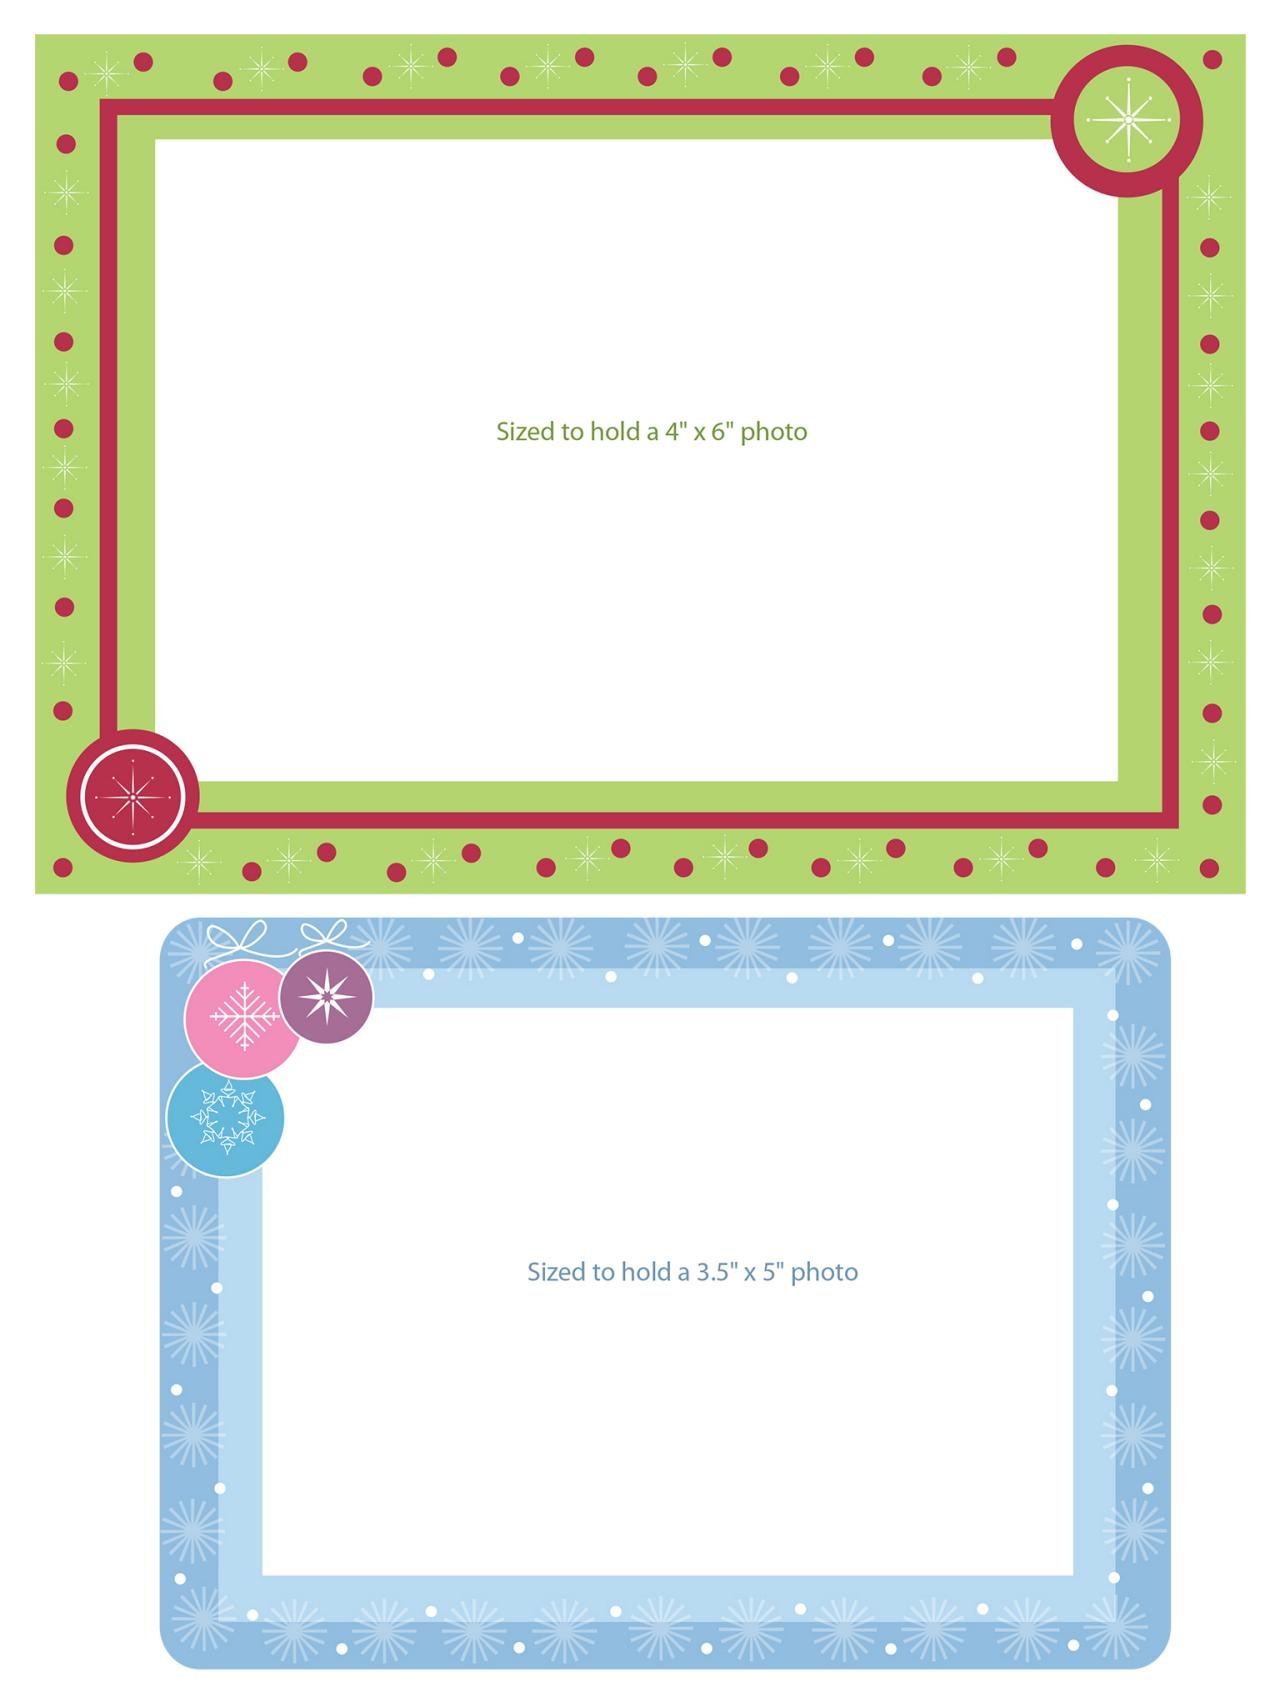 Free Printable Christmas Tent Cards – Festival Collections - Free Printable Christmas Tent Cards